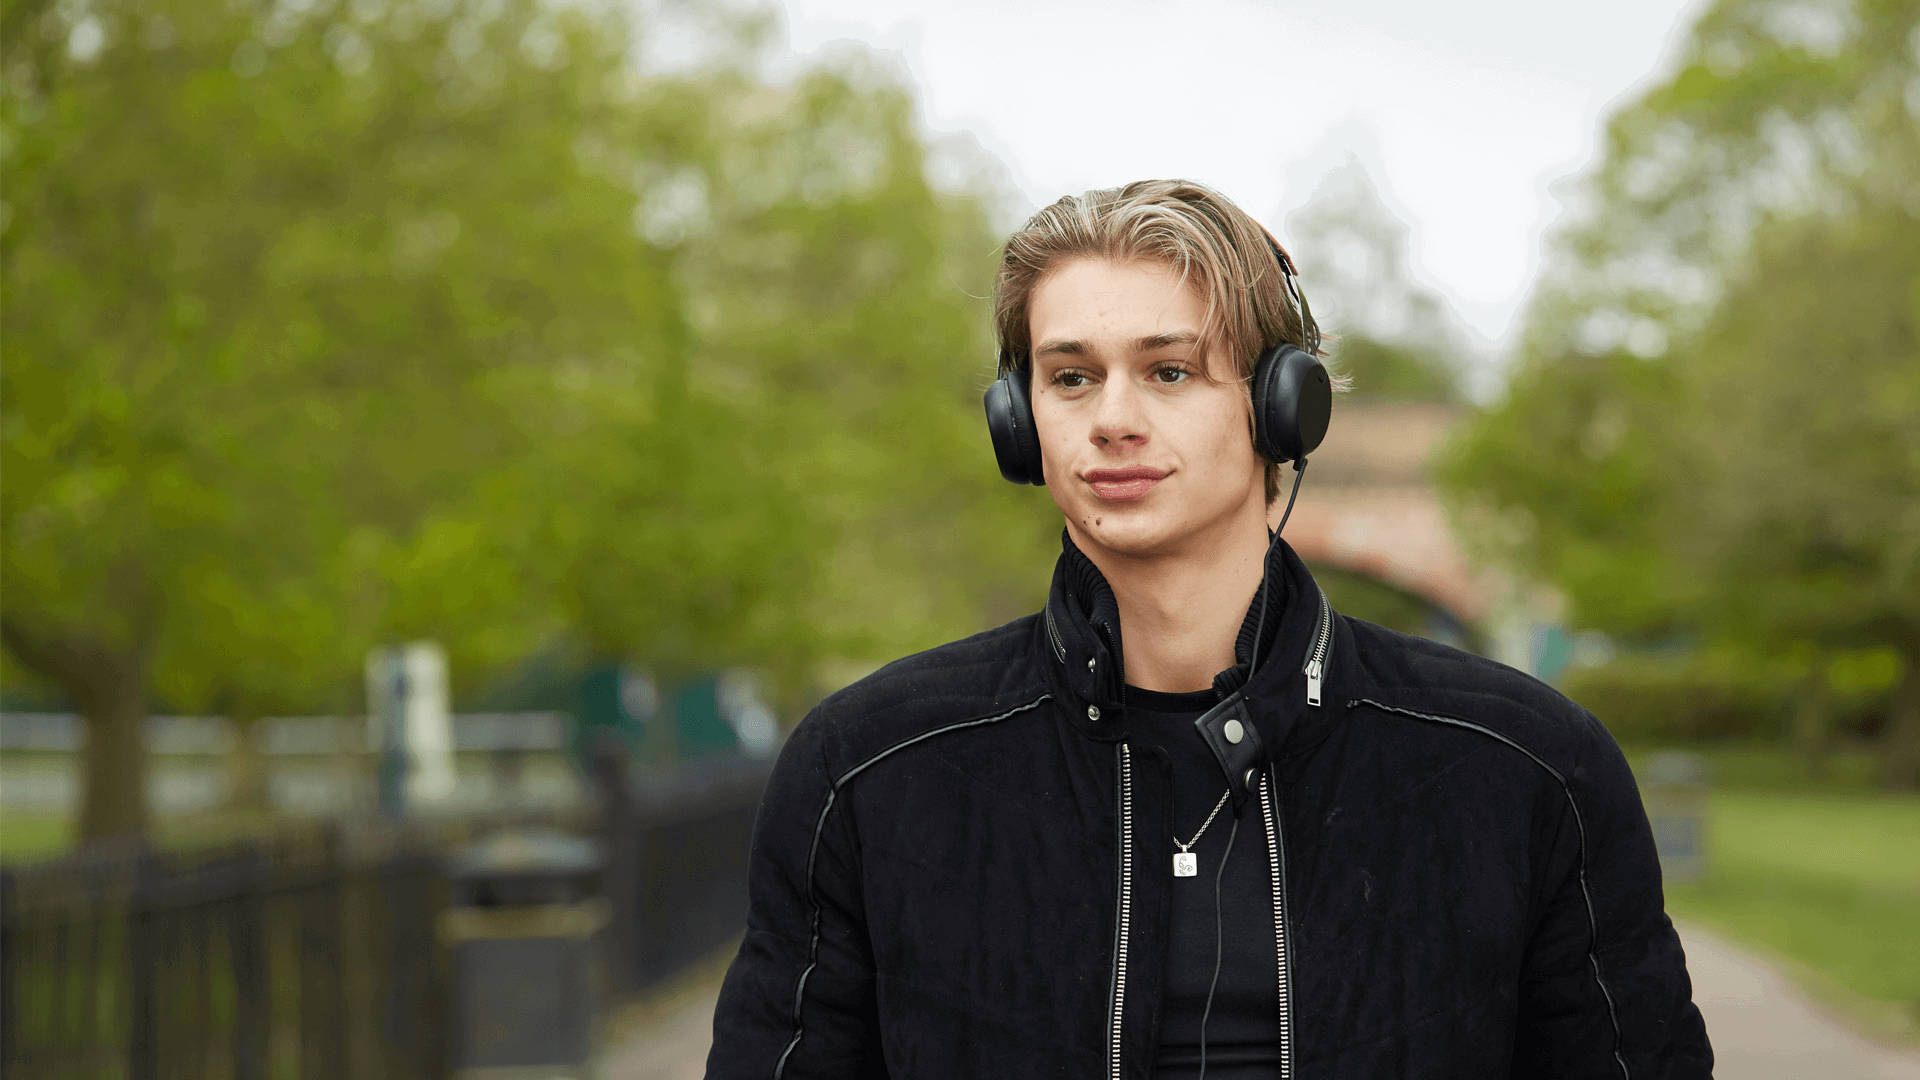 a boy wearing black jacket and with headphones on while walking on a tree lined street